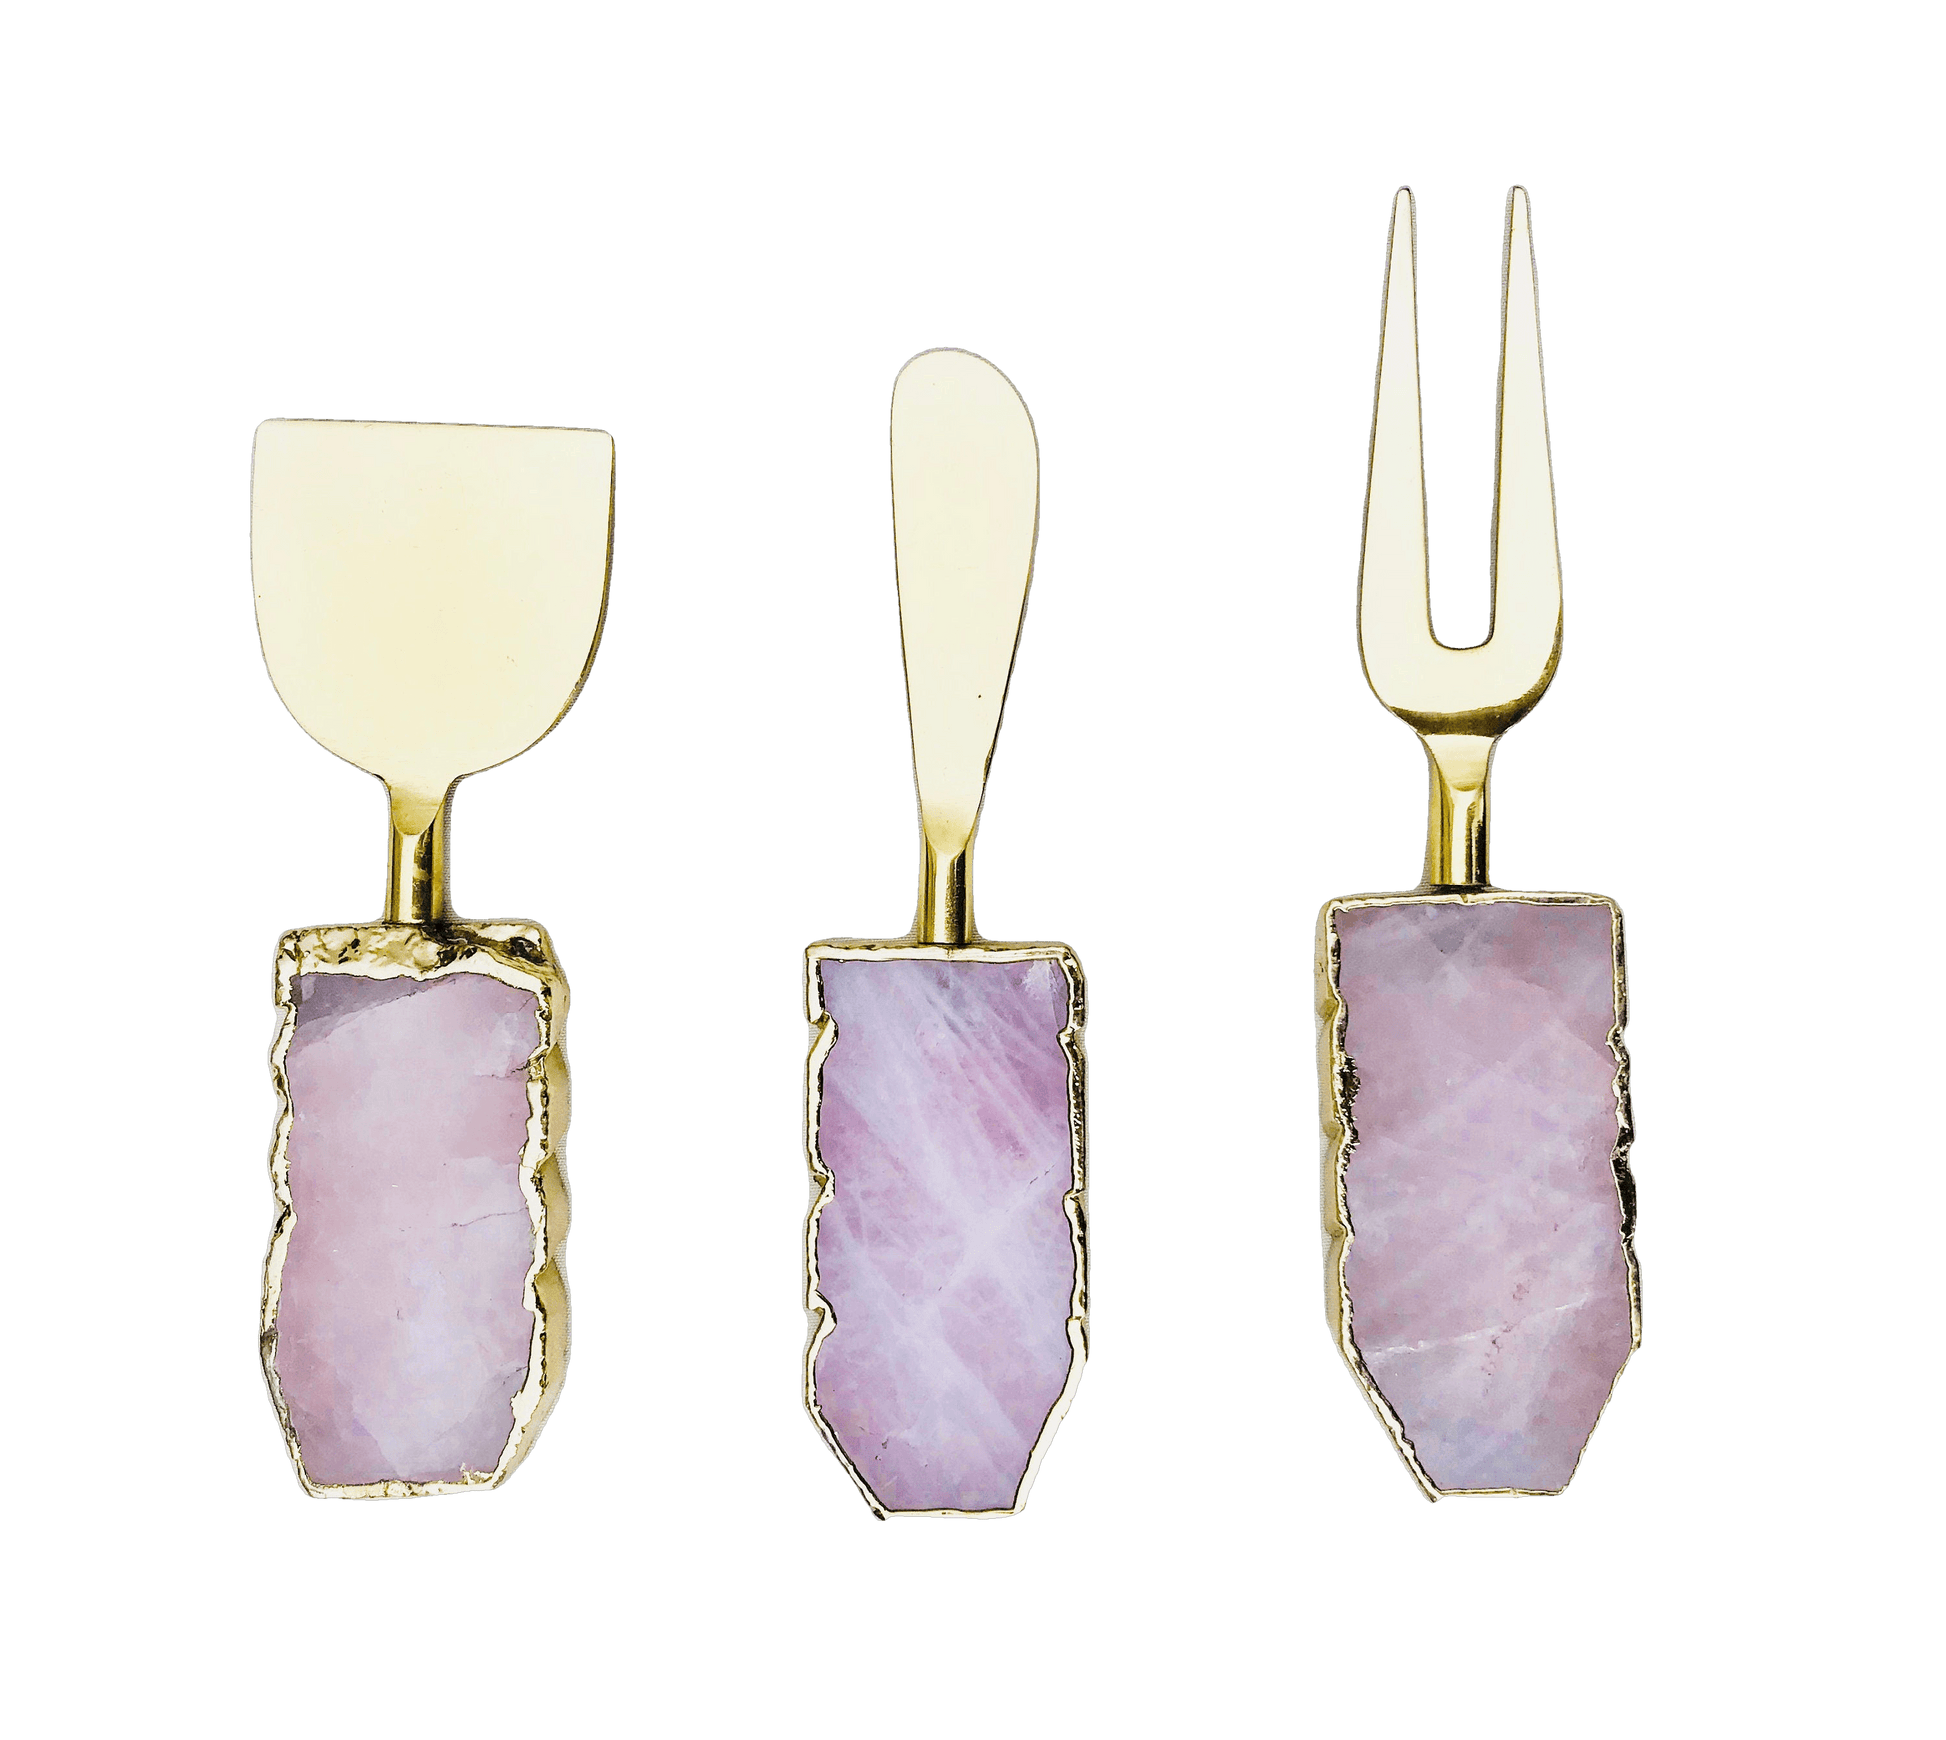 Set of 3 Rose Quartz Cheese Knives Spreaders - MAIA HOMES